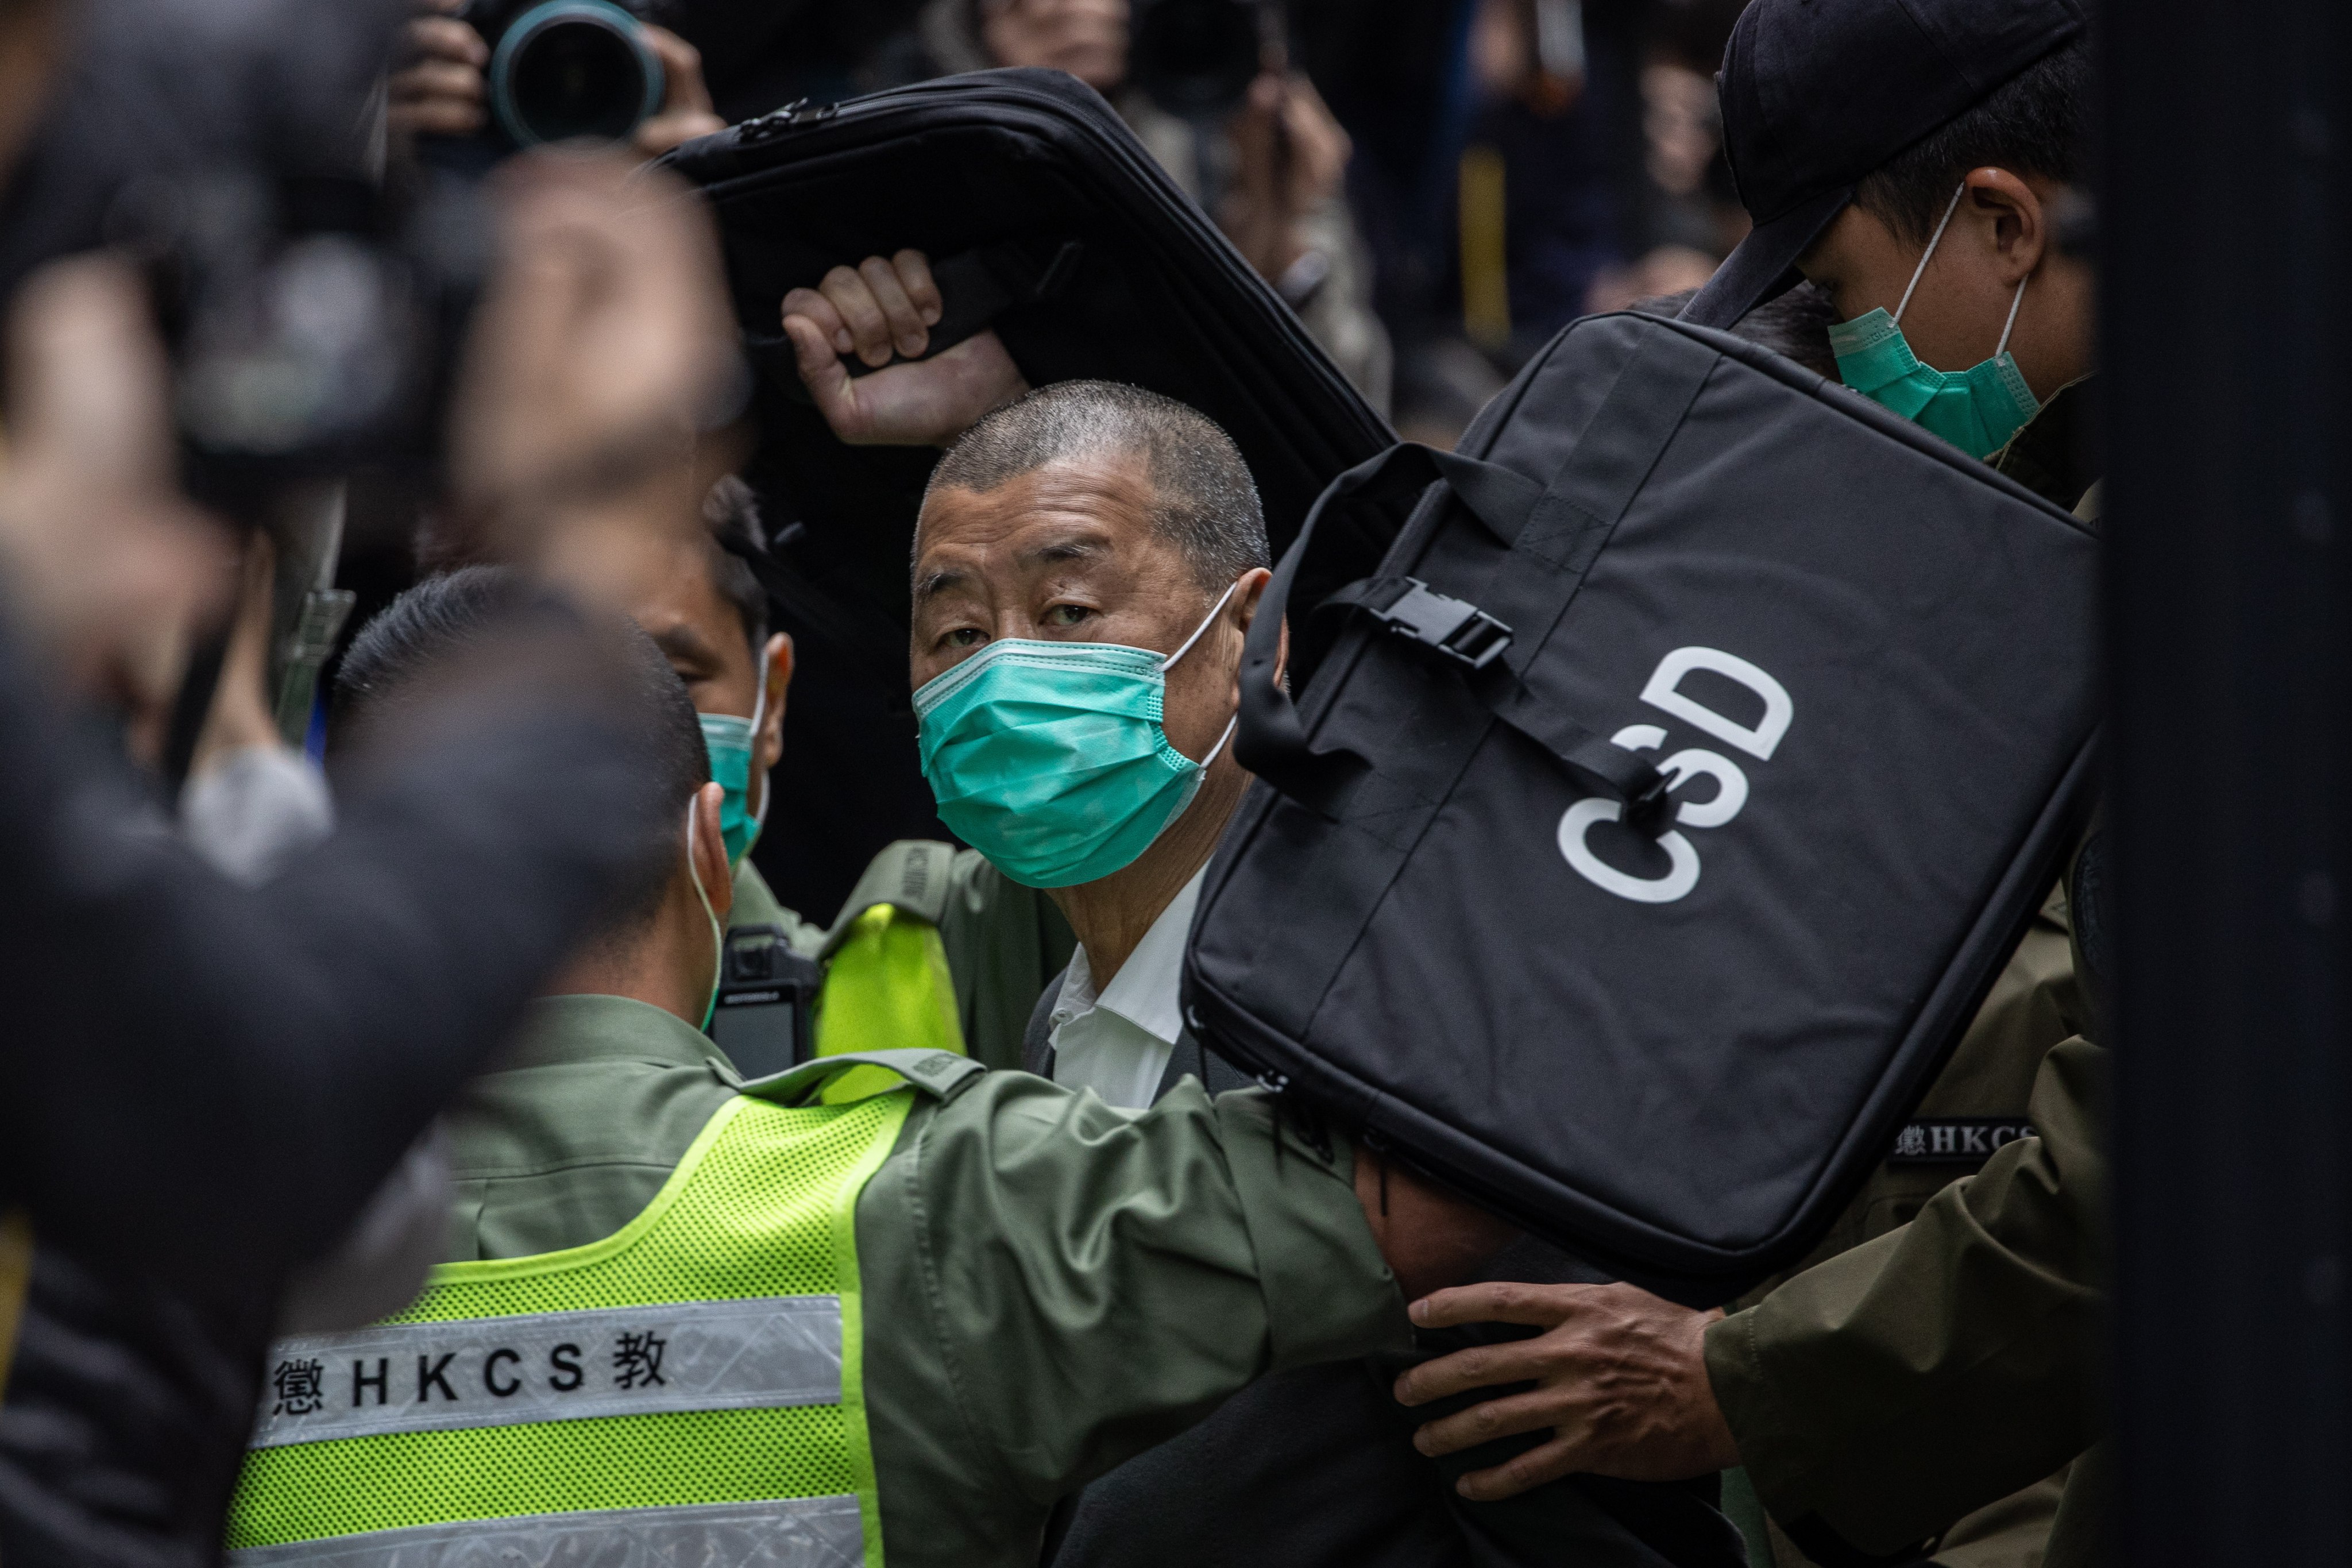 Media mogul Jimmy Lai Chee-ying (centre), seen escorted into the Court of Final Appeal in Hong Kong on Feb. 9, 2021, is among those named in the Congressional-Executive Commission on China’s letter. Photo: EPA-EFE